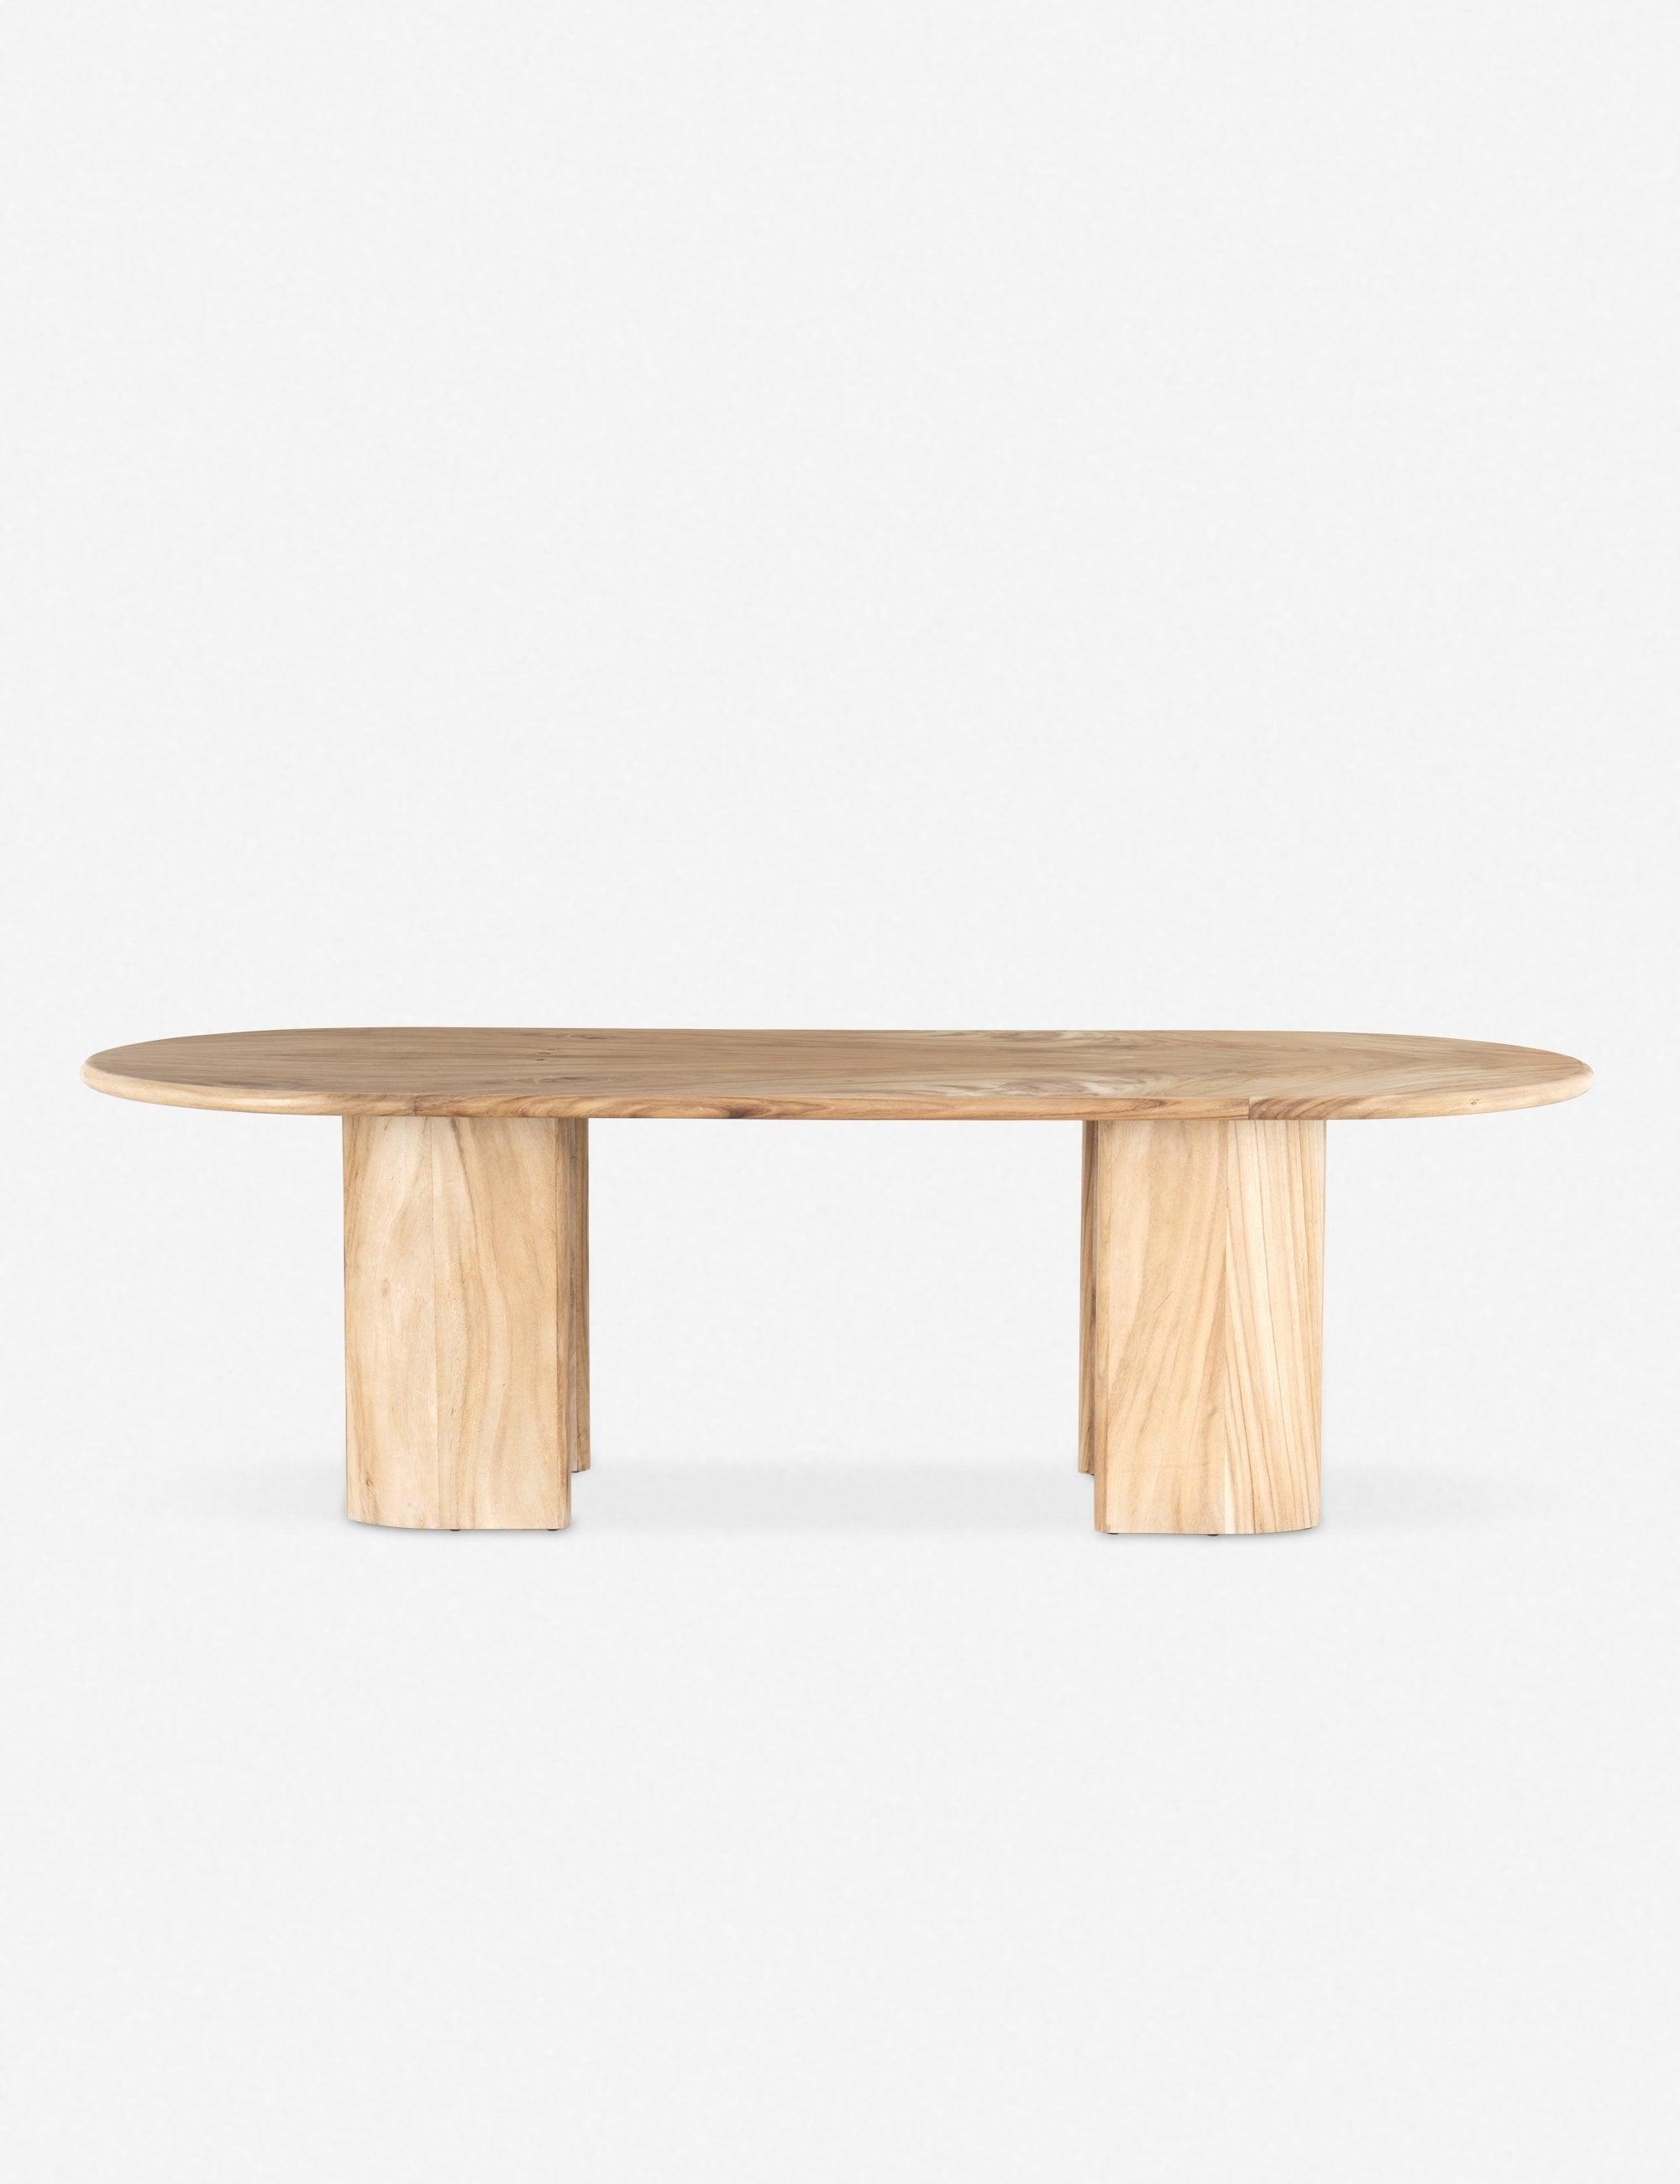 Elegant Guanacaste Wood Oval Dining Table in Rich Brown